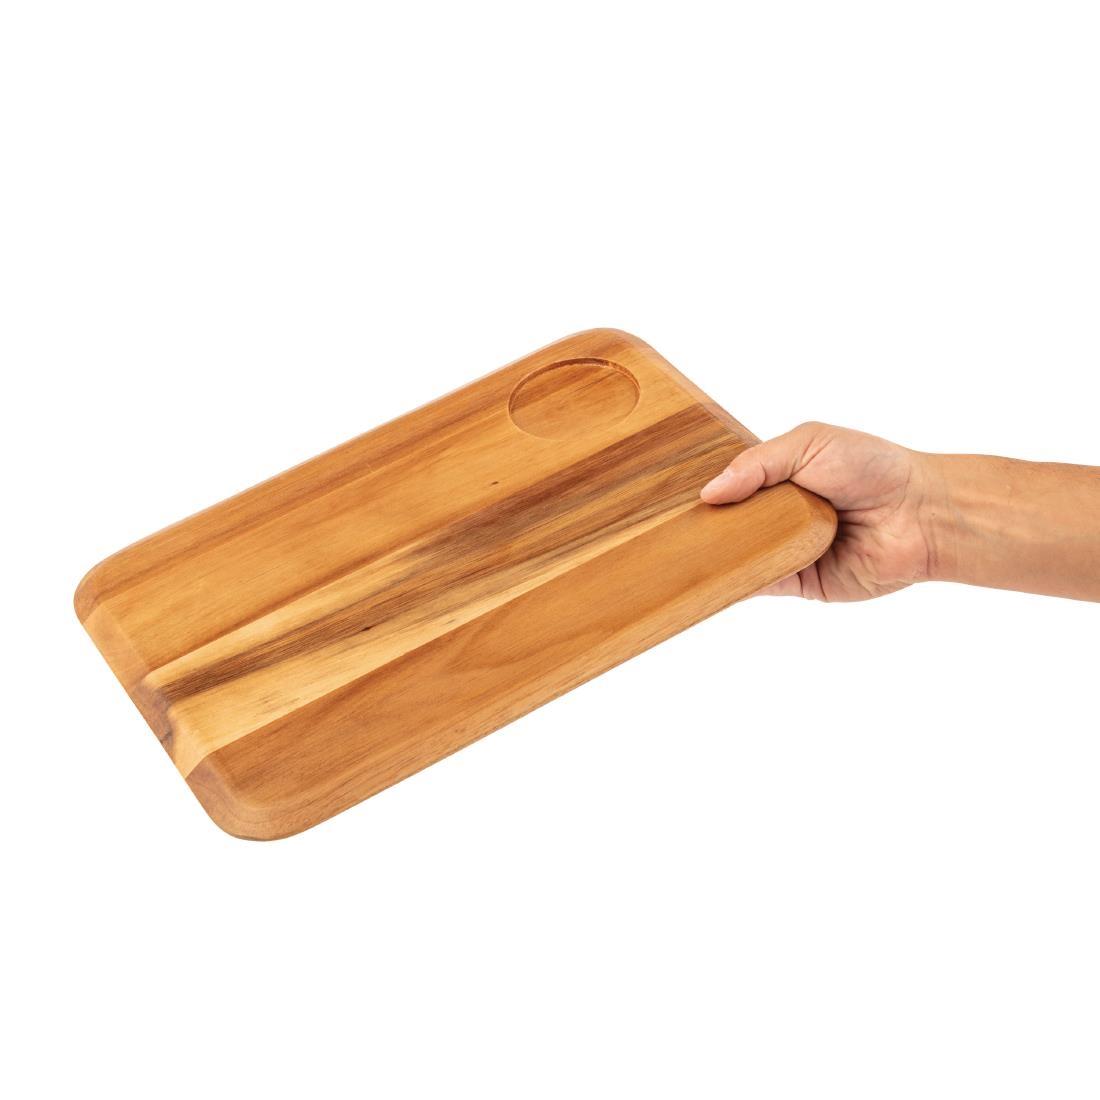 Rounded Acacia Wooden Serving Board - DP156  - 4